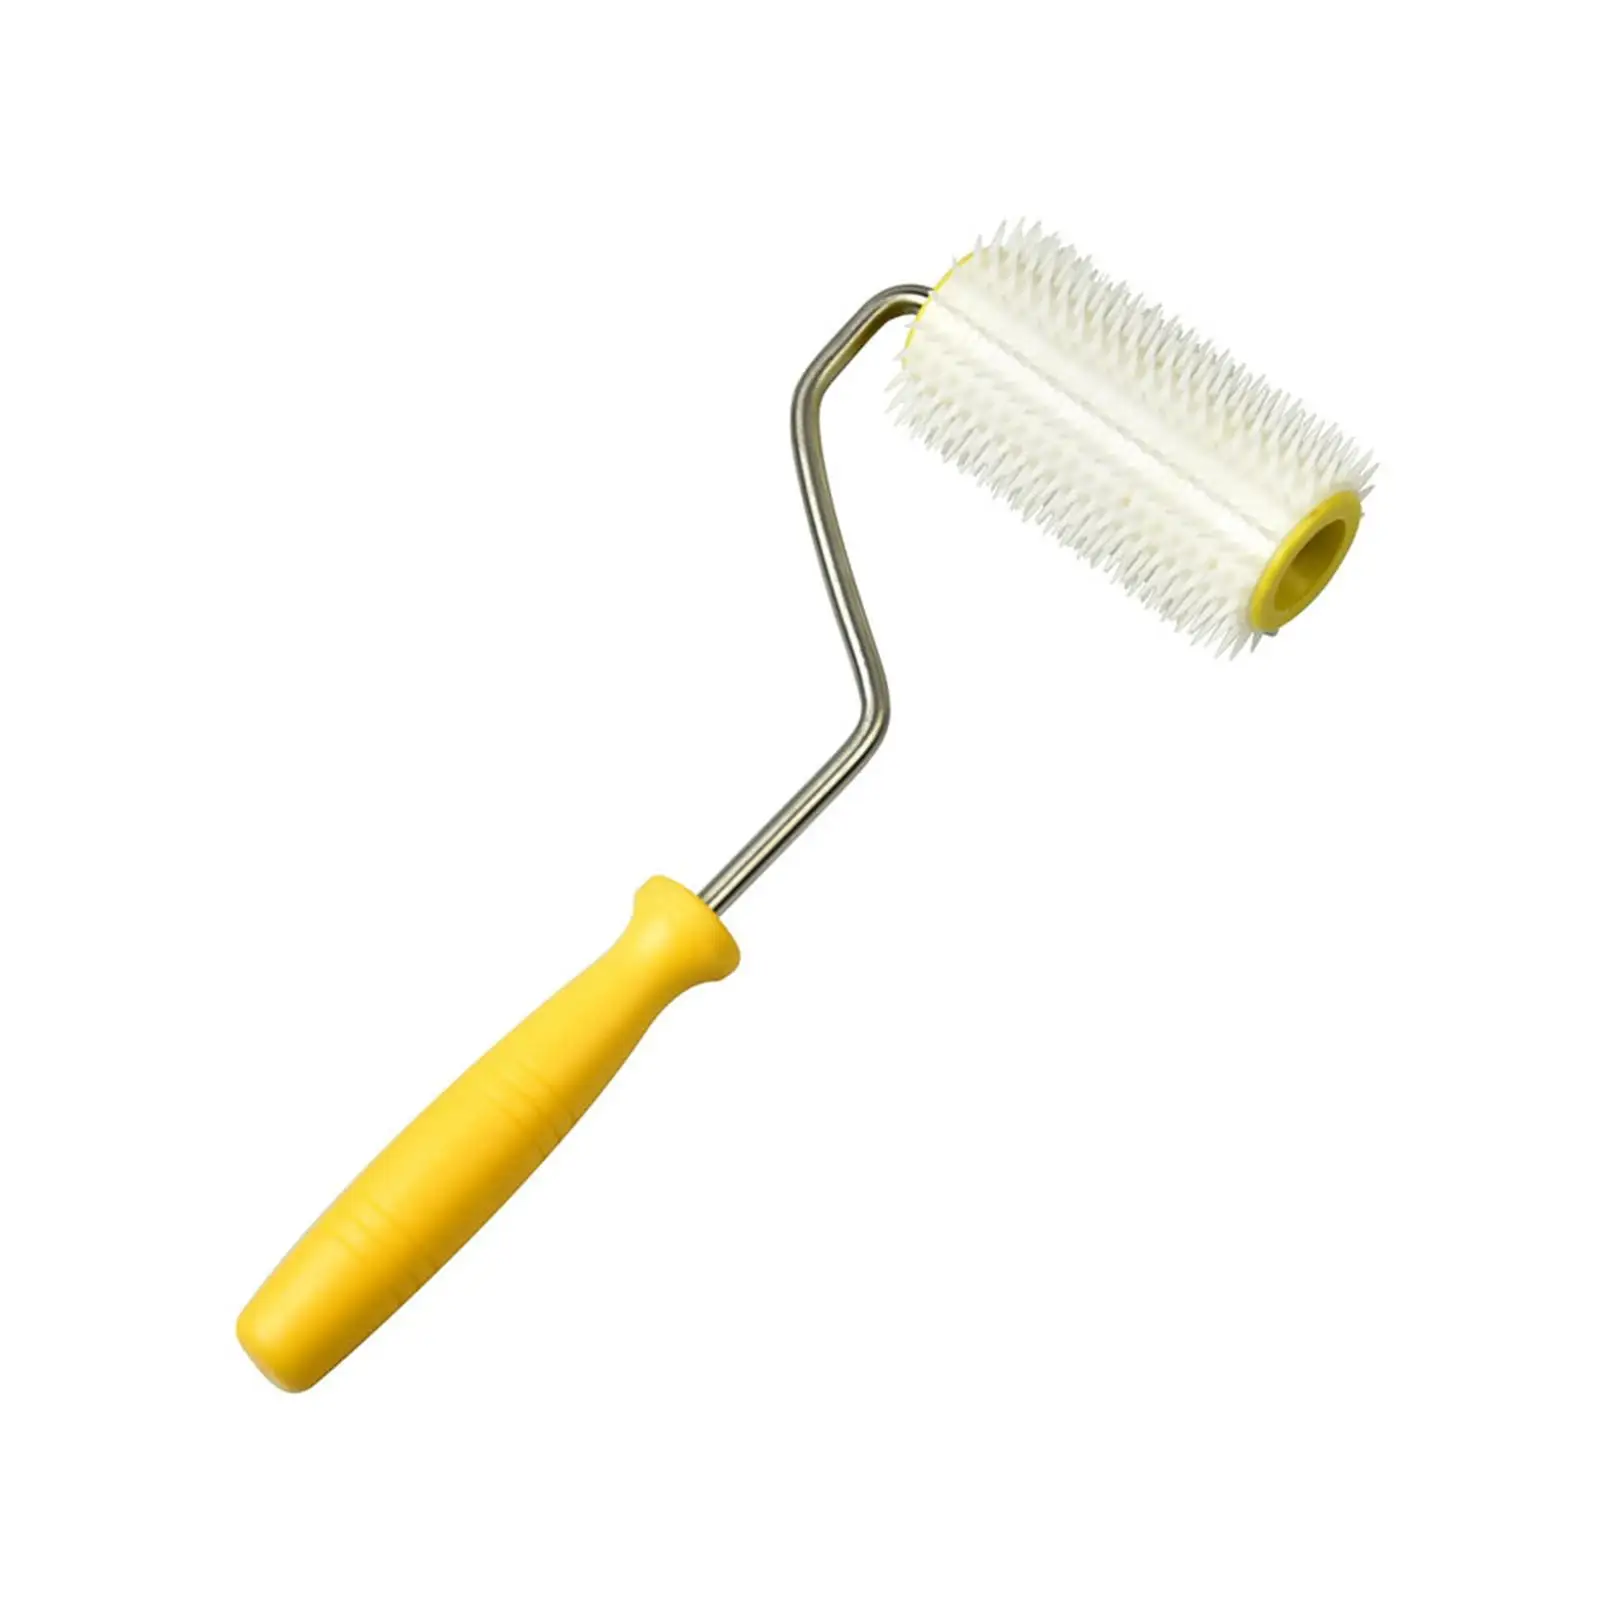 Honey Uncapping Roller Honey Uncapping Cutter Tool Portable Beekeeping Equipment Beekeeping Supplies Professional for Extracting